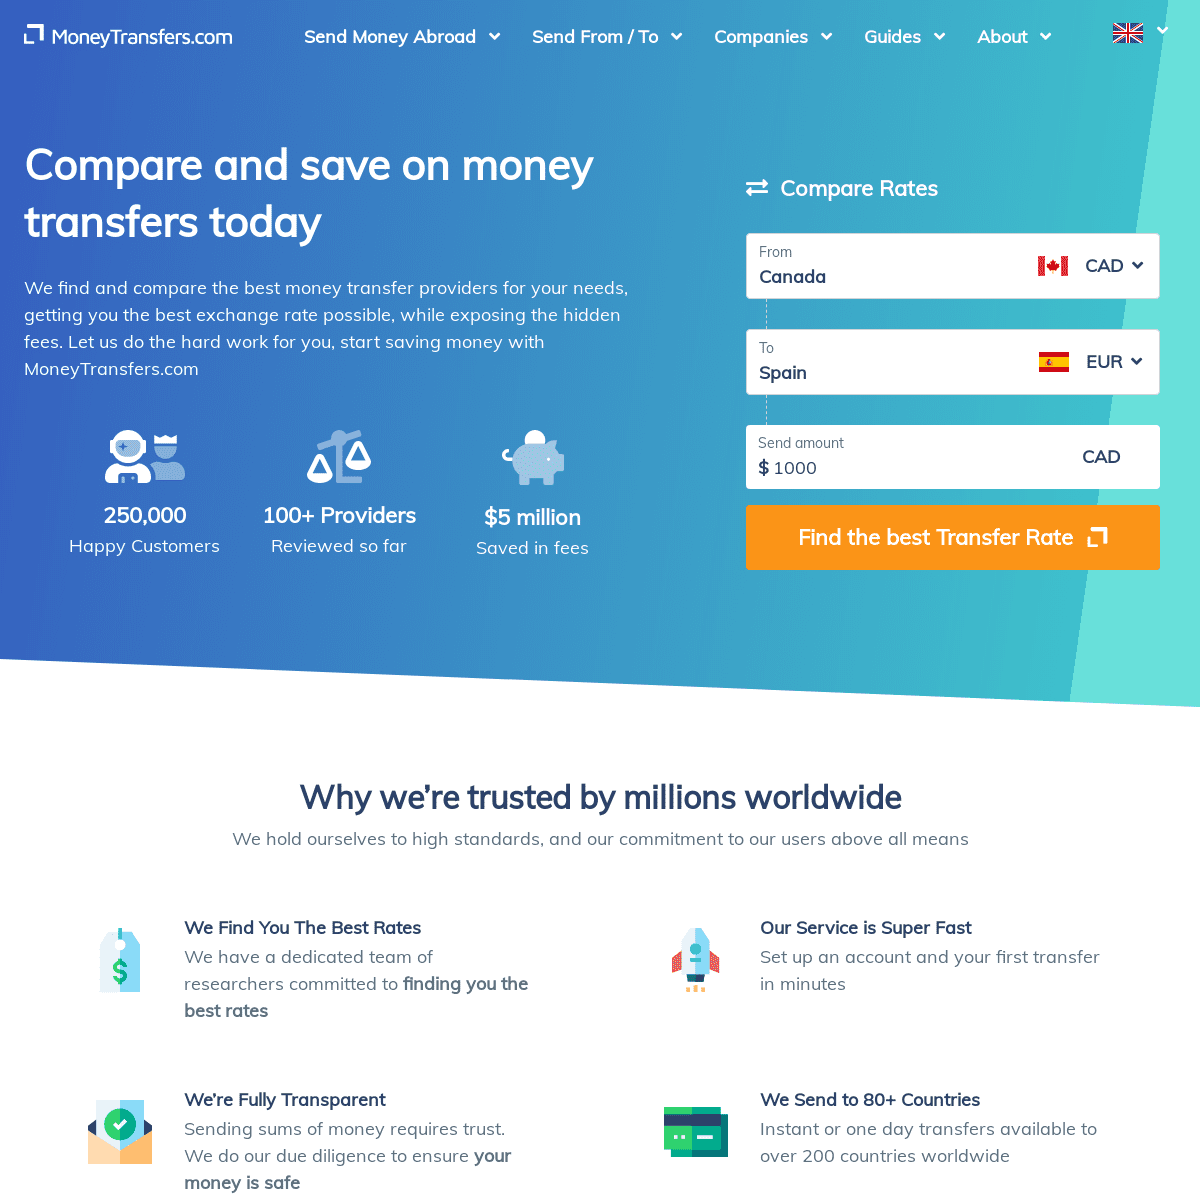 A complete backup of https://moneytransfers.com